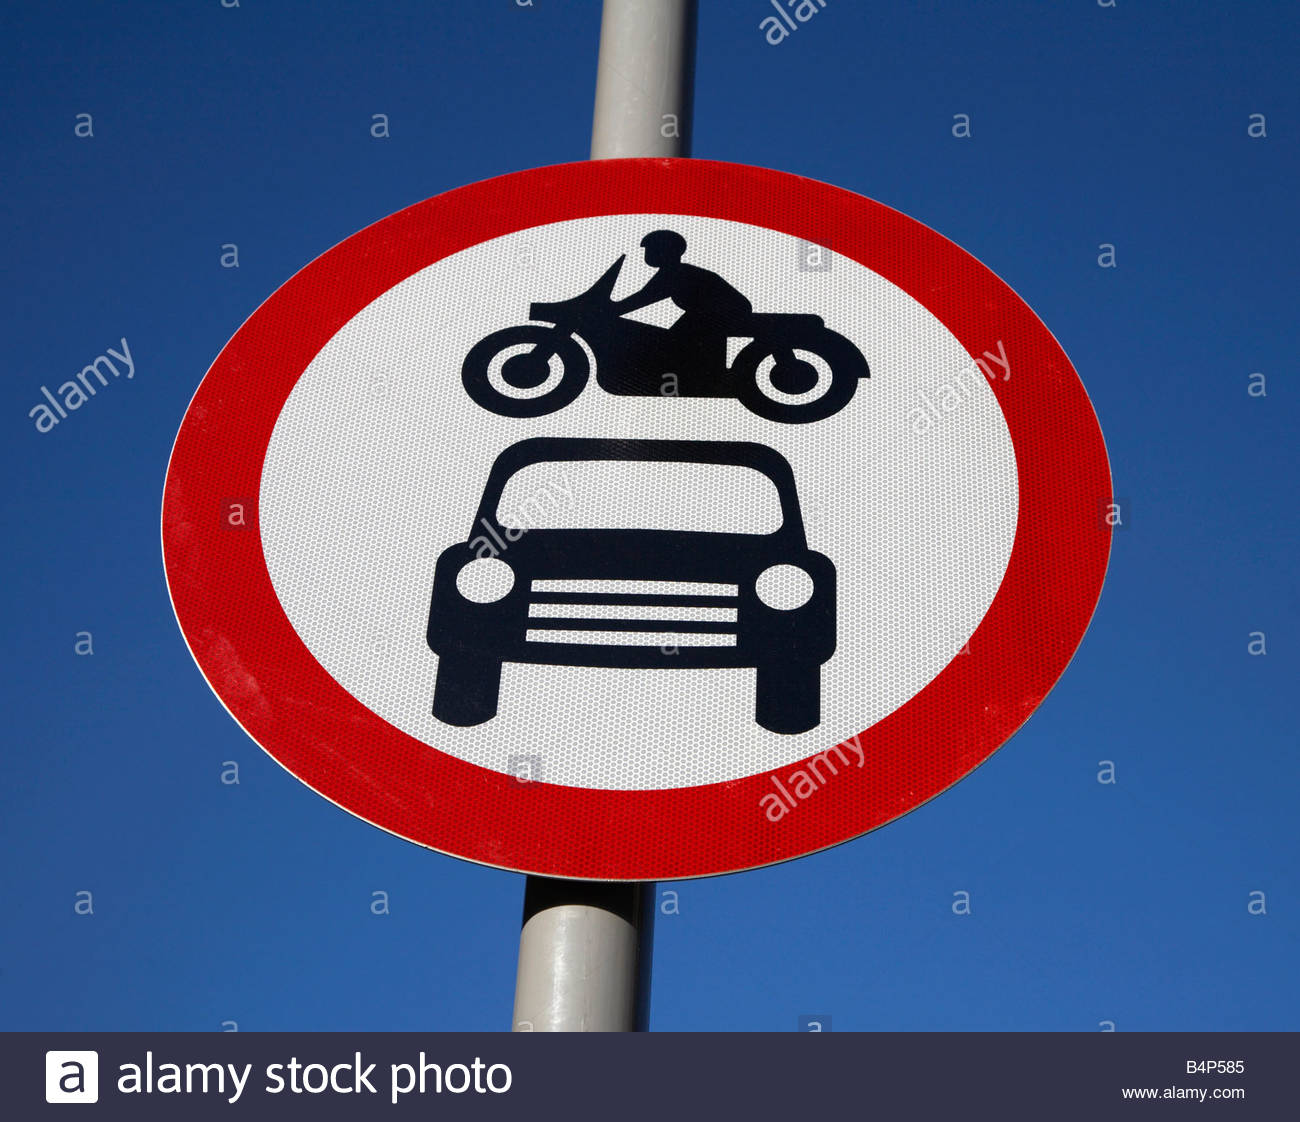 No access for Motorbikes or cars sign Stock Photo